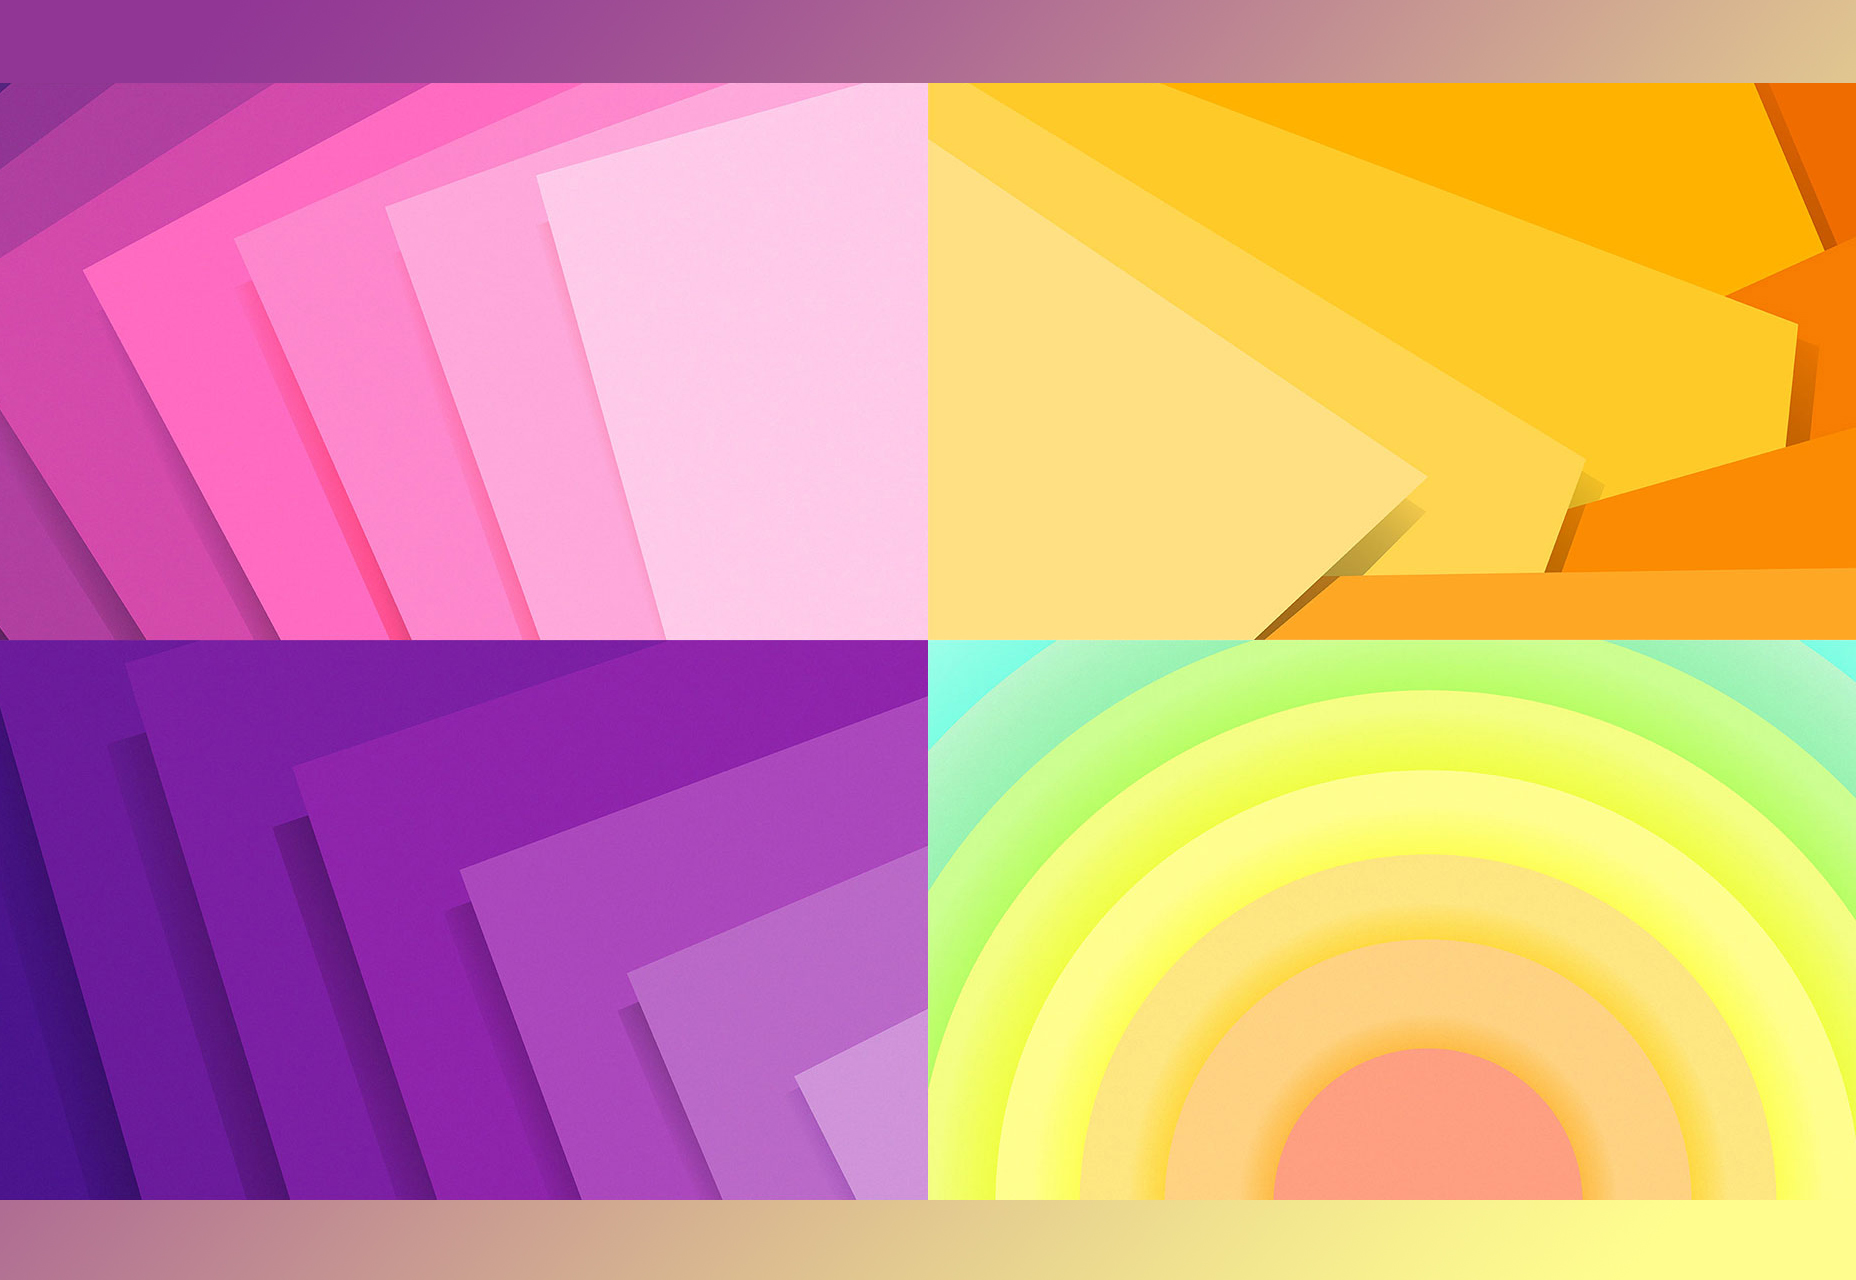 Amazing Set of 40 Material Design Backgrounds